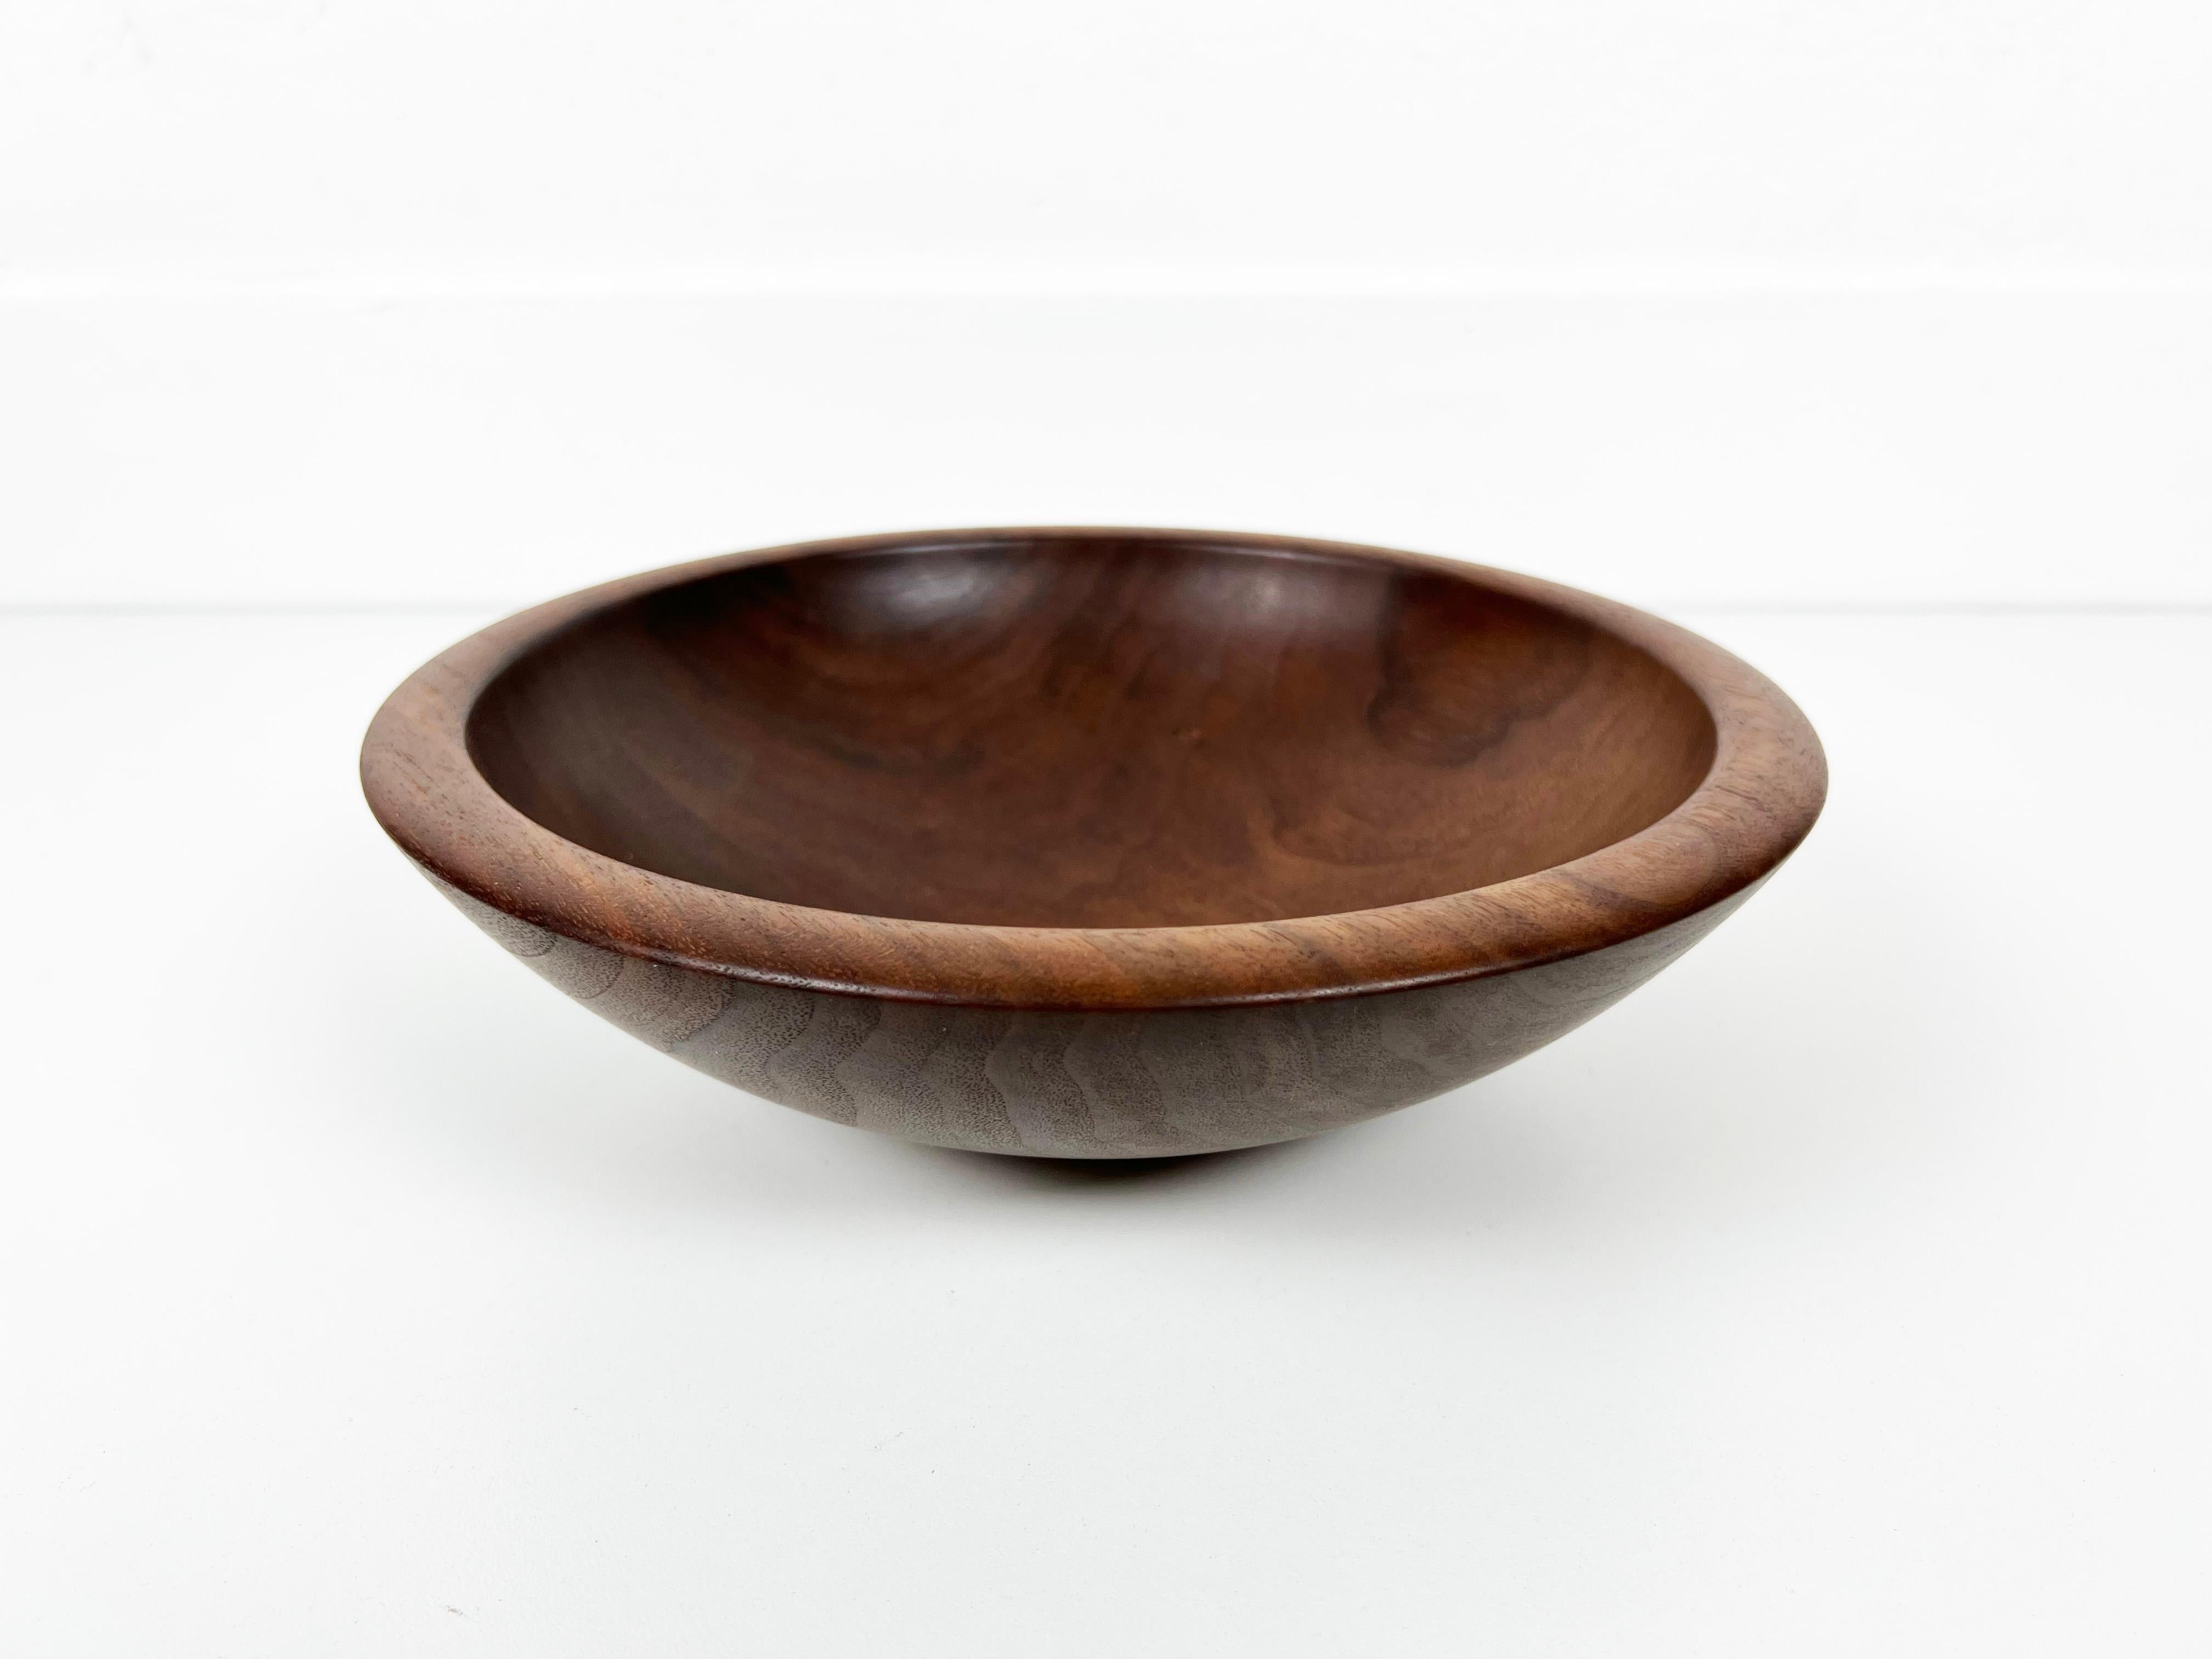 Contemporary Andrew Pearce Walnut Champlain Serving Bowl For Sale